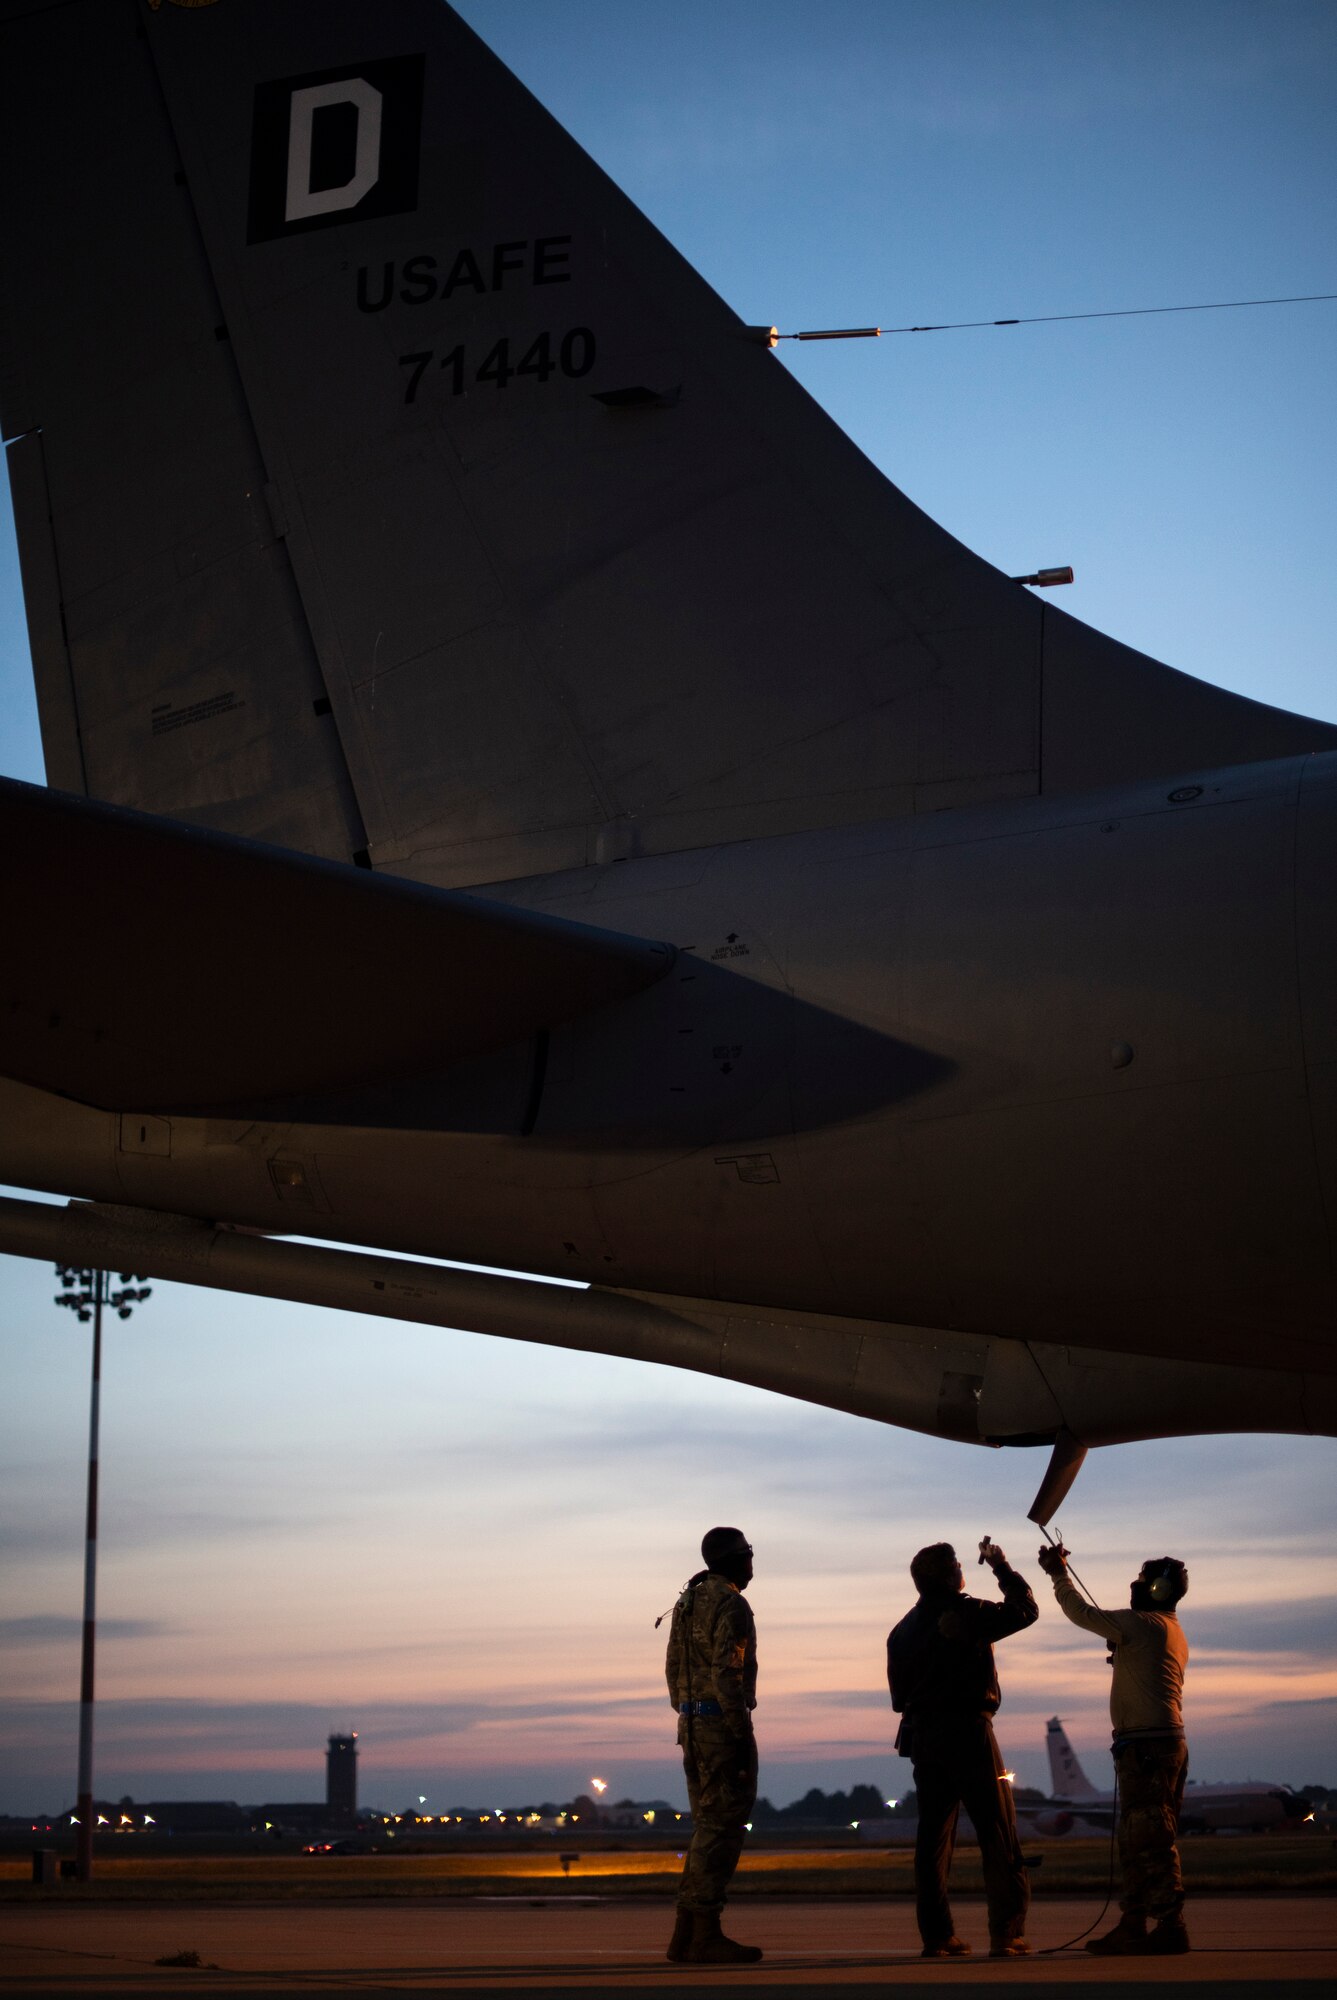 Airmen from the 351st Air Refueling Squadron and 100th Aircraft Maintenance Squadron inspect a KC-135 Stratotanker prior to a flight supporting Bomber Task Force Europe, at RAF Mildenhall, England, May 20, 2020. The mission marked the first time B-1s have flown over Sweden to integrate with Swedish Gripens while conducting close-air support training with Swedish Joint Terminal Attack Controller ground teams at Vidsel Range. (U.S. Air Force photo by Tech. Sgt. Emerson Nuñez)